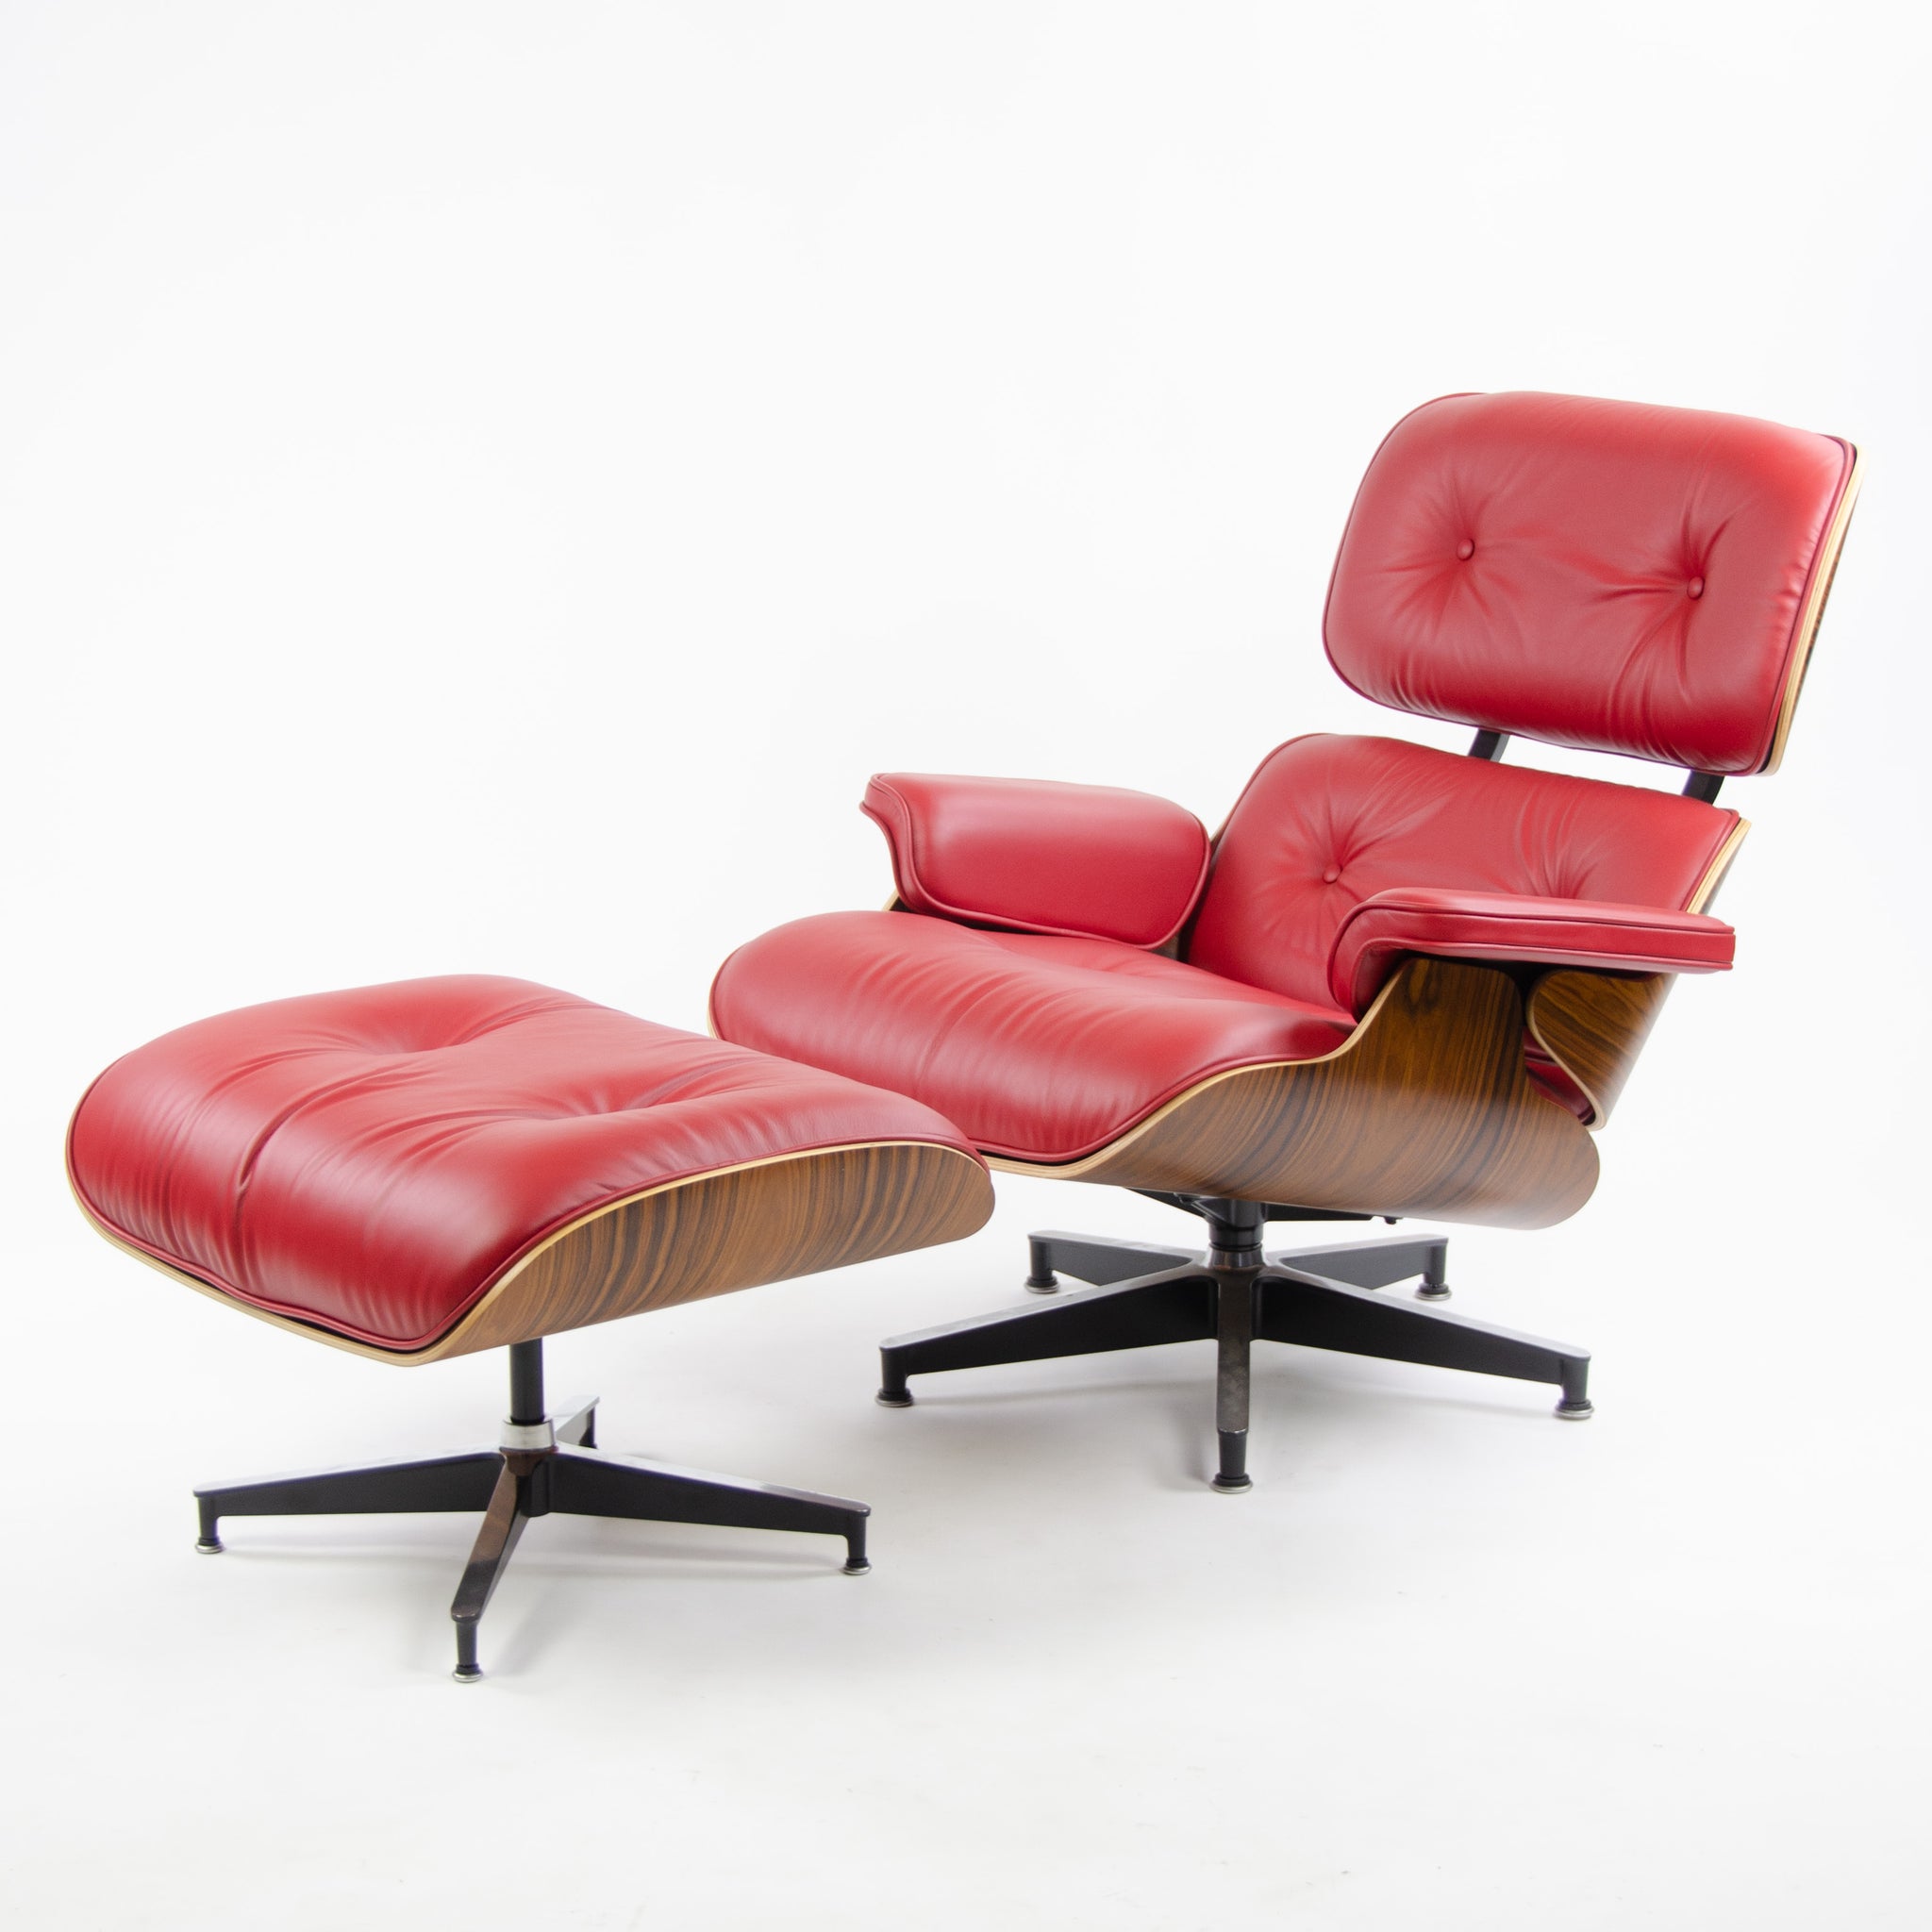 SOLD Herman Miller Eames Lounge Chair & Ottoman Palisander 670 671 Red Leather Brand New In Box